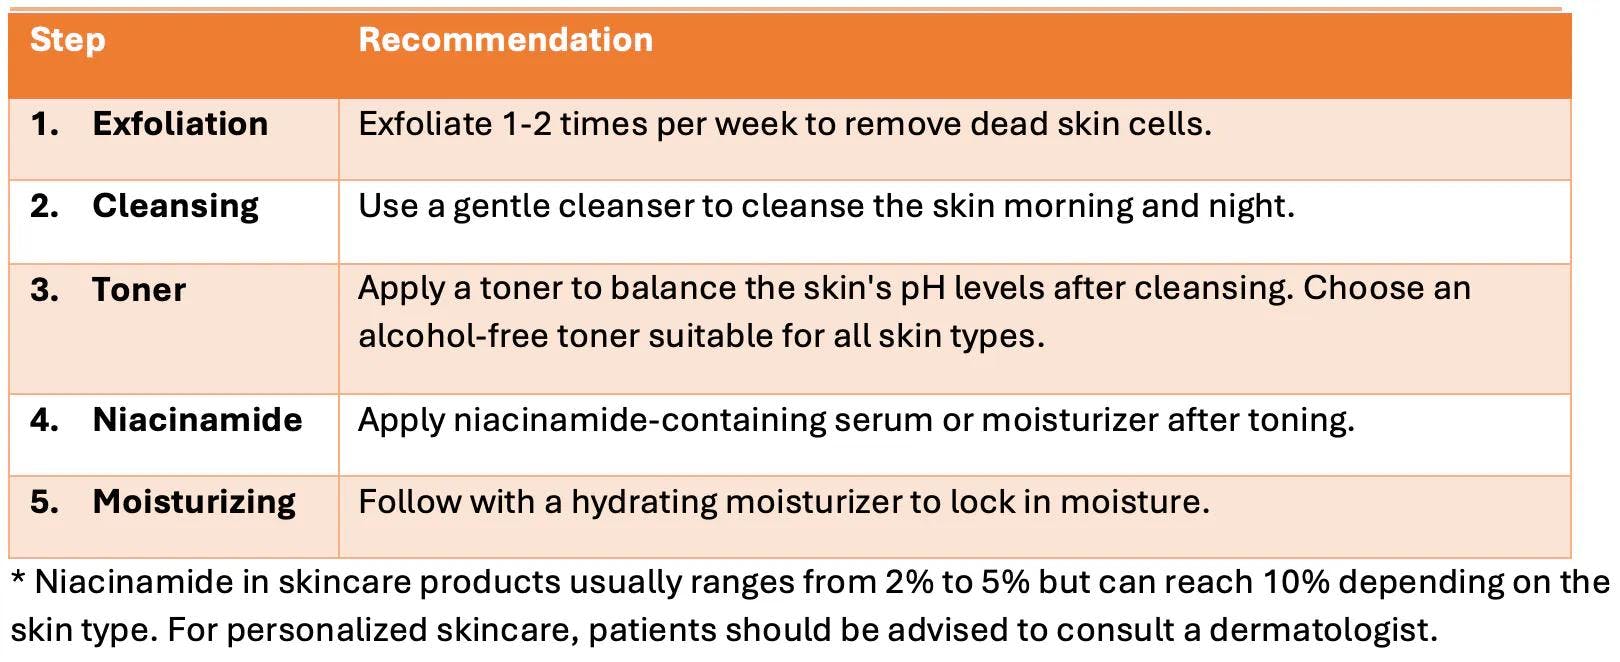 Skin care regimen recommendations; courtesy of Pharmacy Times